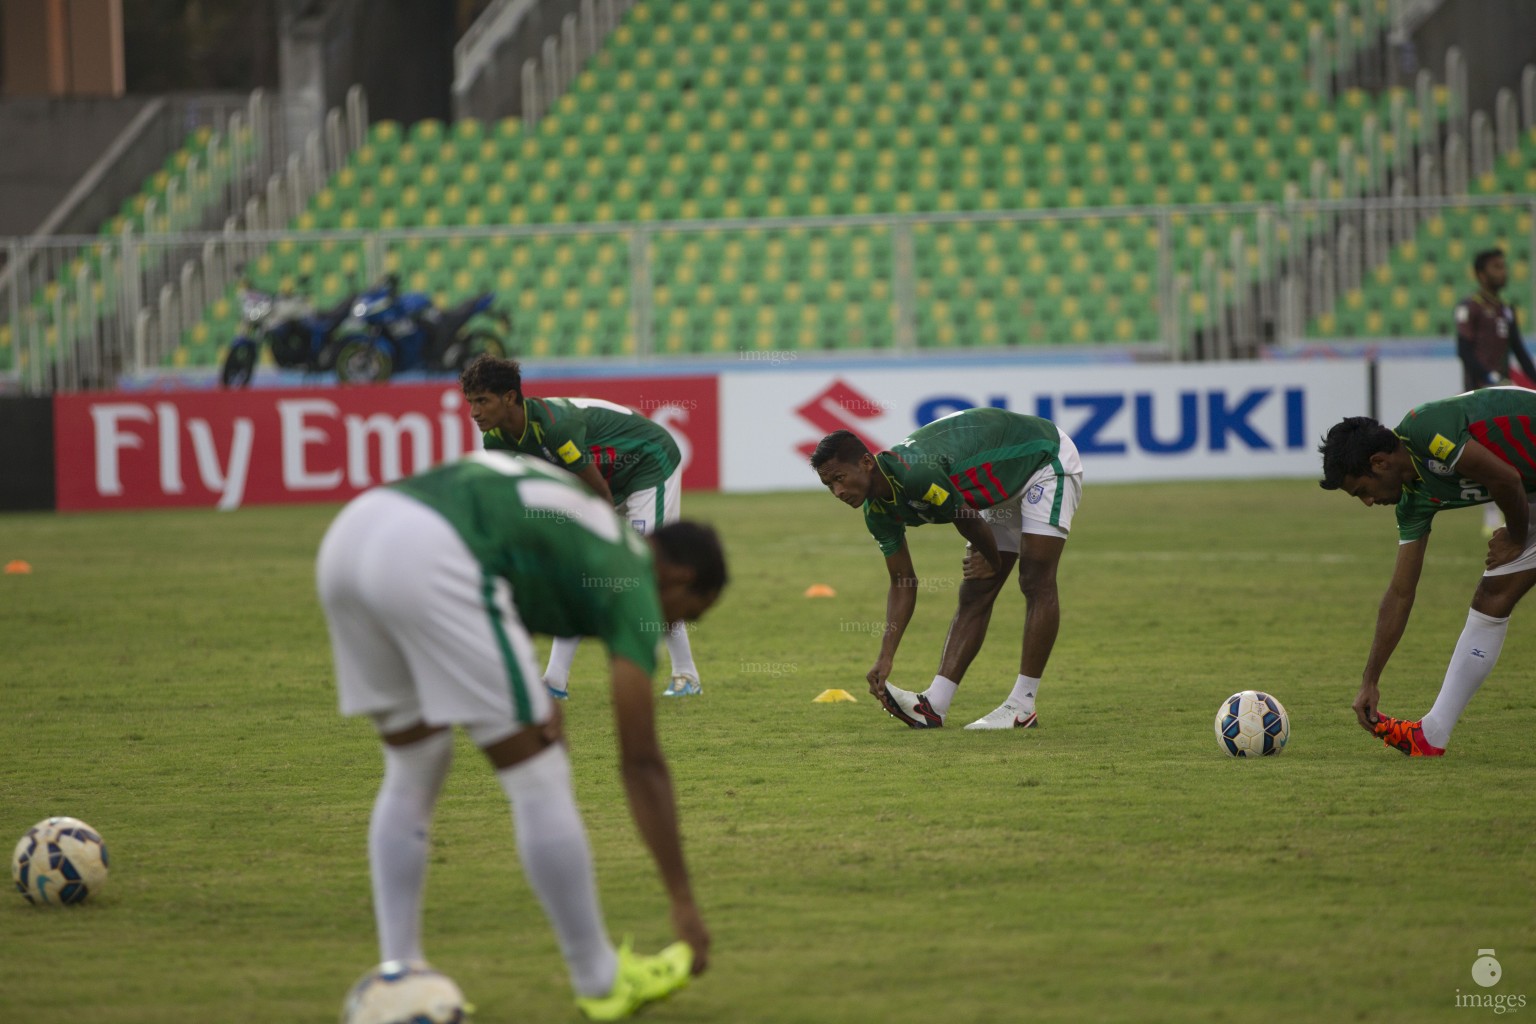 Players of Afghanistan  and Bangladesh warms up ahead of the SAFF Suzuki Cup match in Thiruvananthapuram, India, Wednesday, December 24, 2015. (Images.mv Photo: Mohamed Ahsan)